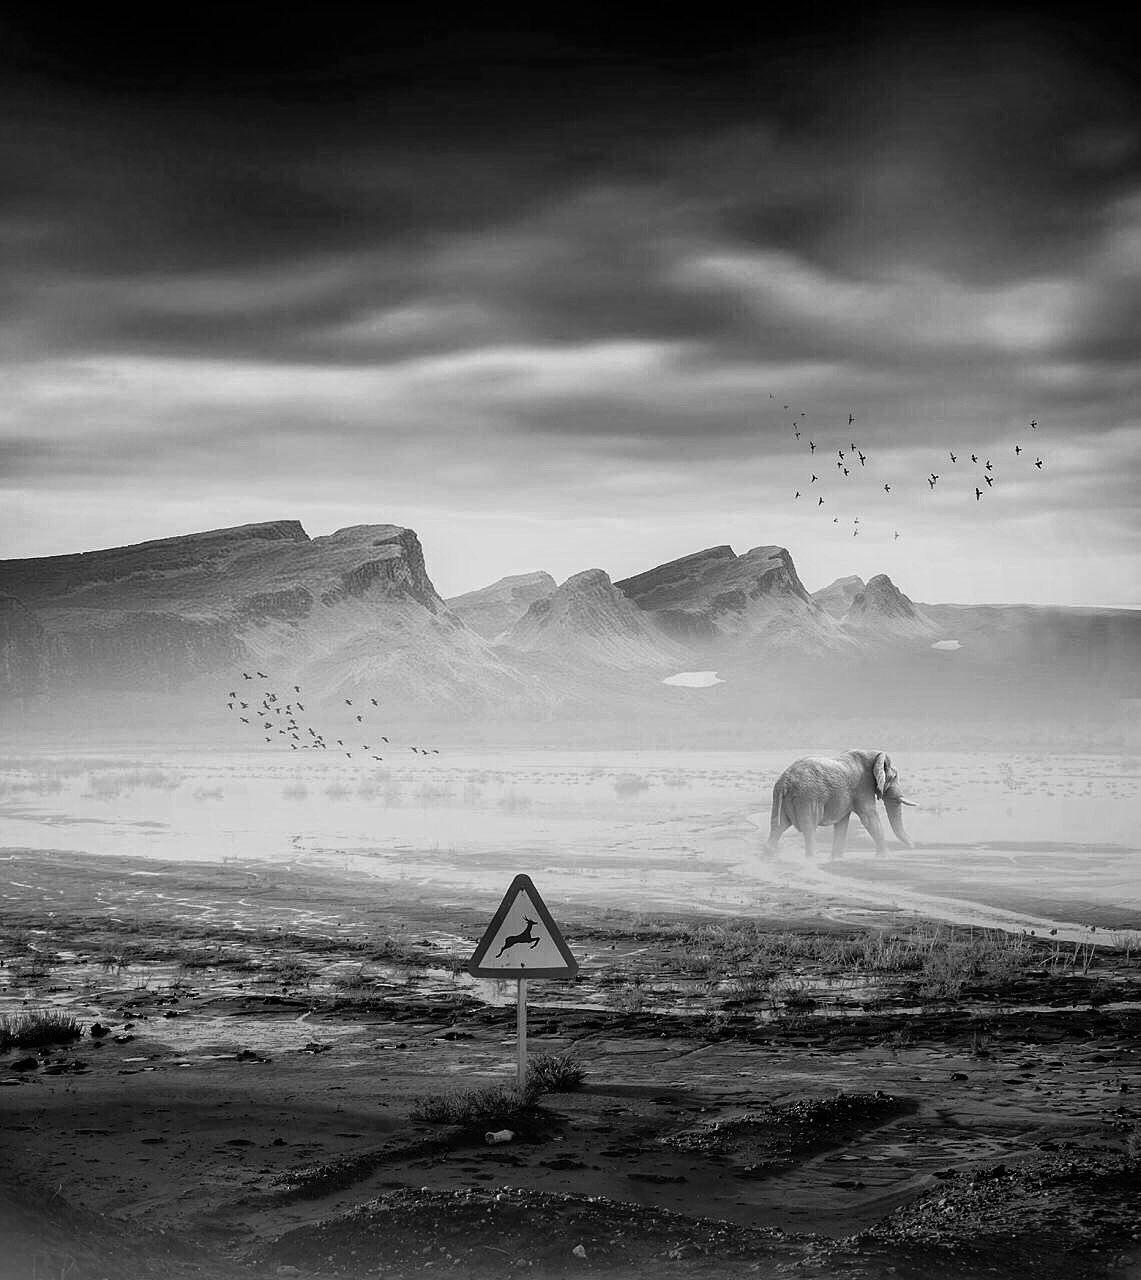 #Cross#breeding #fil #hossein_mehrzad #mehrzad_photo #fine_art #bnw #black_and_white #consept #photoshop #photomontage #mehrzad #art #dark #be_one_bw #bnw_one #bwworld_tr #bnw_rose #hossein_mehrzad #mehrzad_photo #top_bnw #bnw_of_our_world #iran_photograp, Hossein Mehrzad